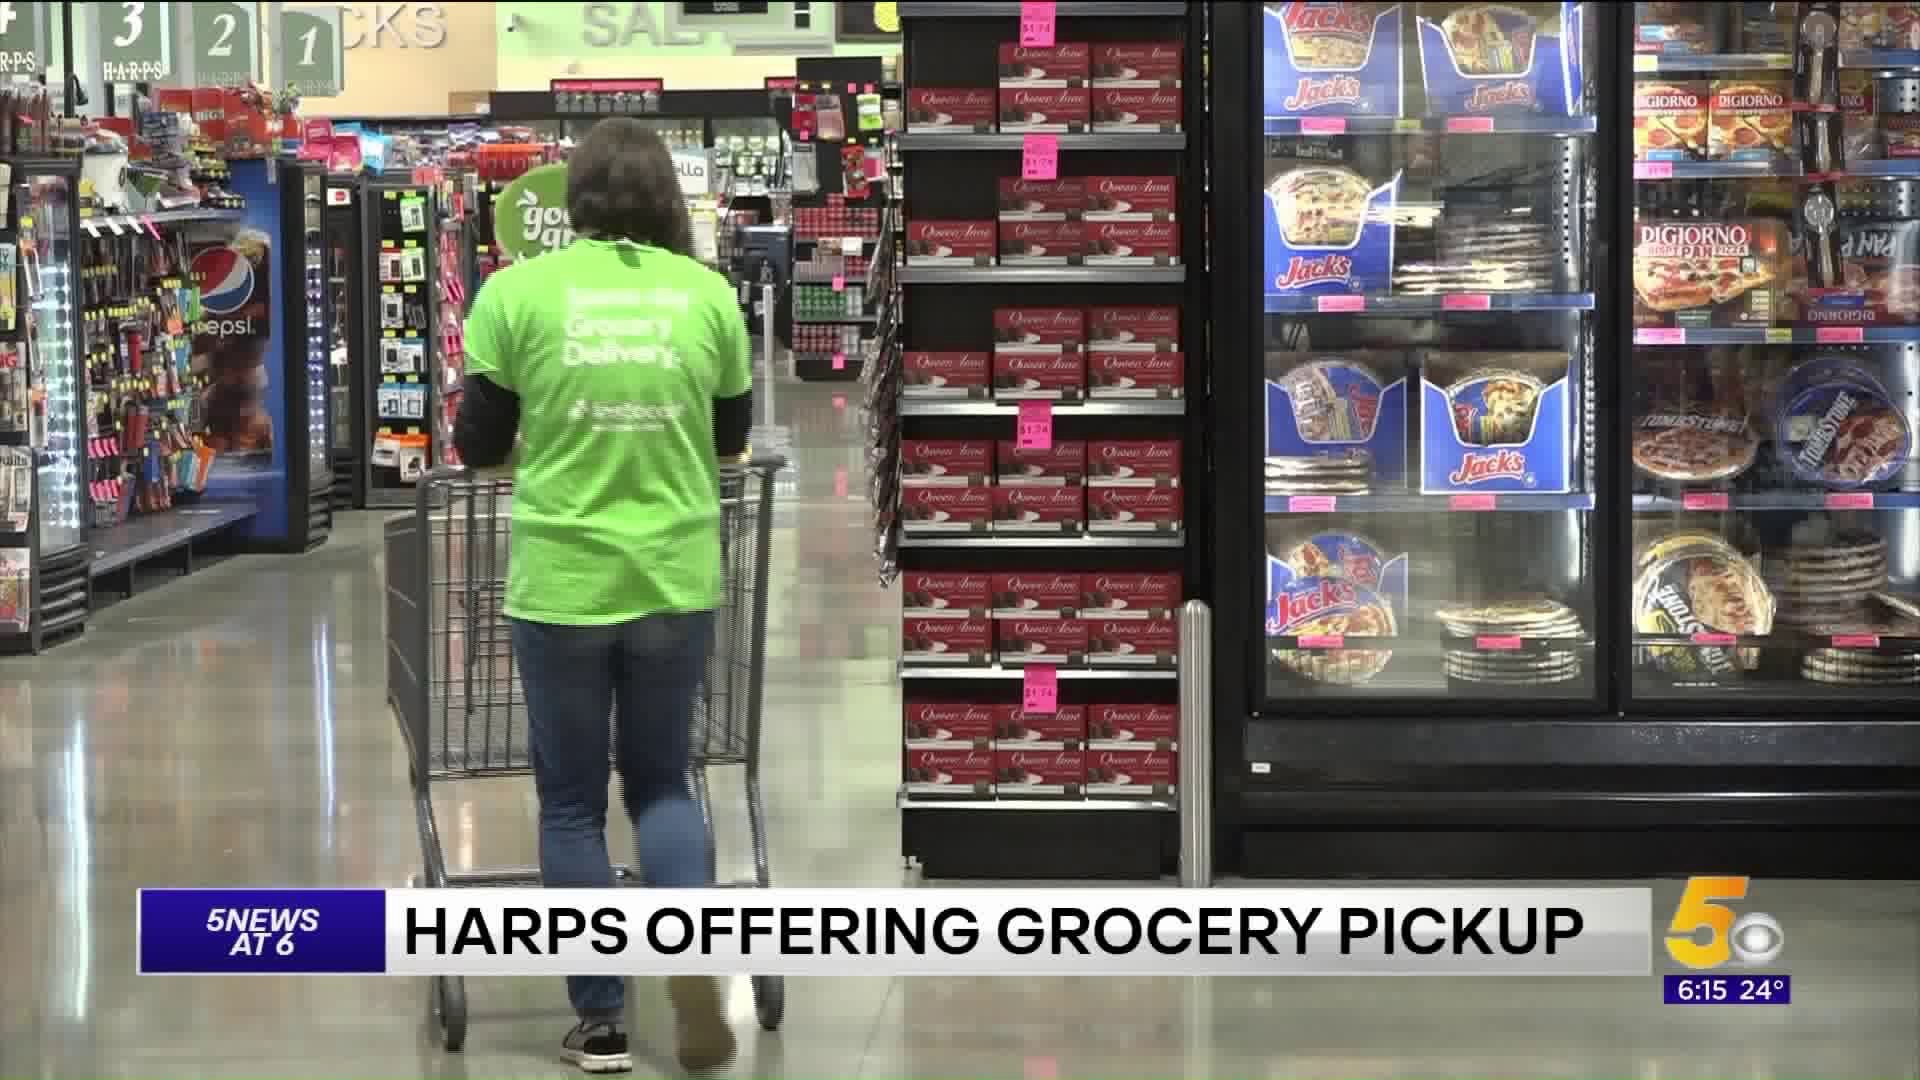 Harps Food Stores Launches Grocery Pickup Service